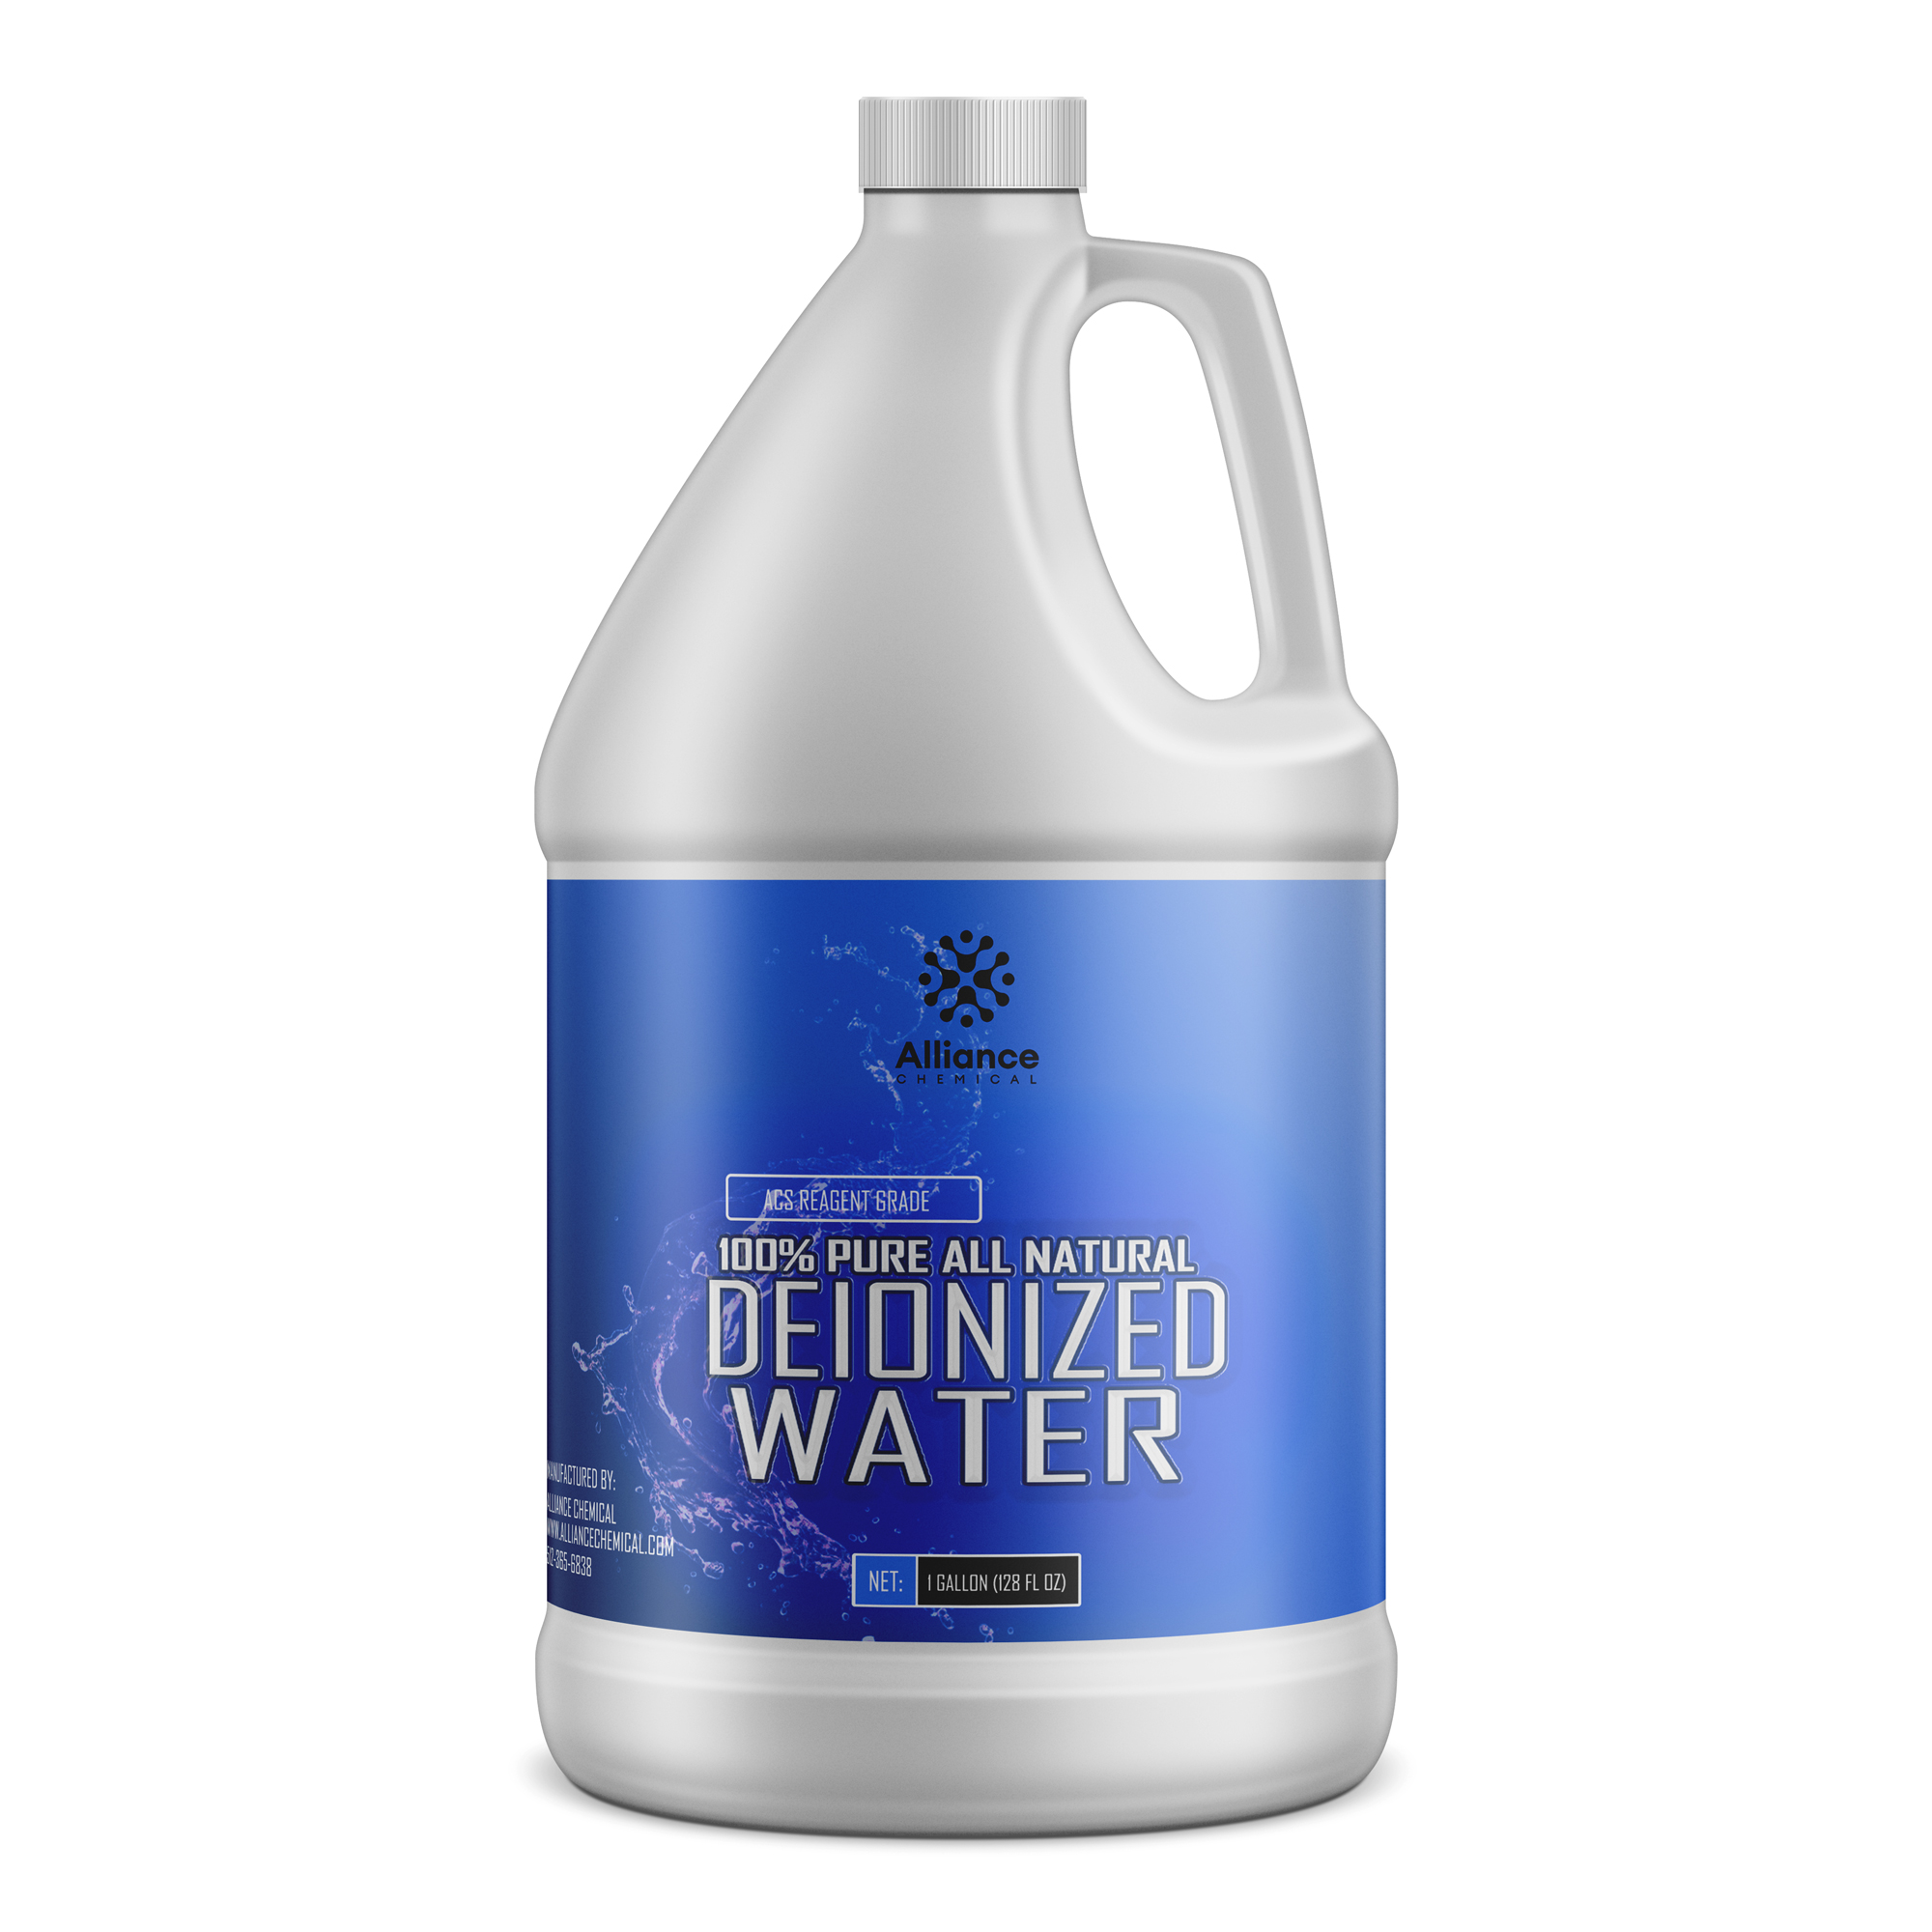 Deionized Water for Sale  Buy Deionized Water Gallons & Bulk Deionized  Totes at Serv-A-Pure